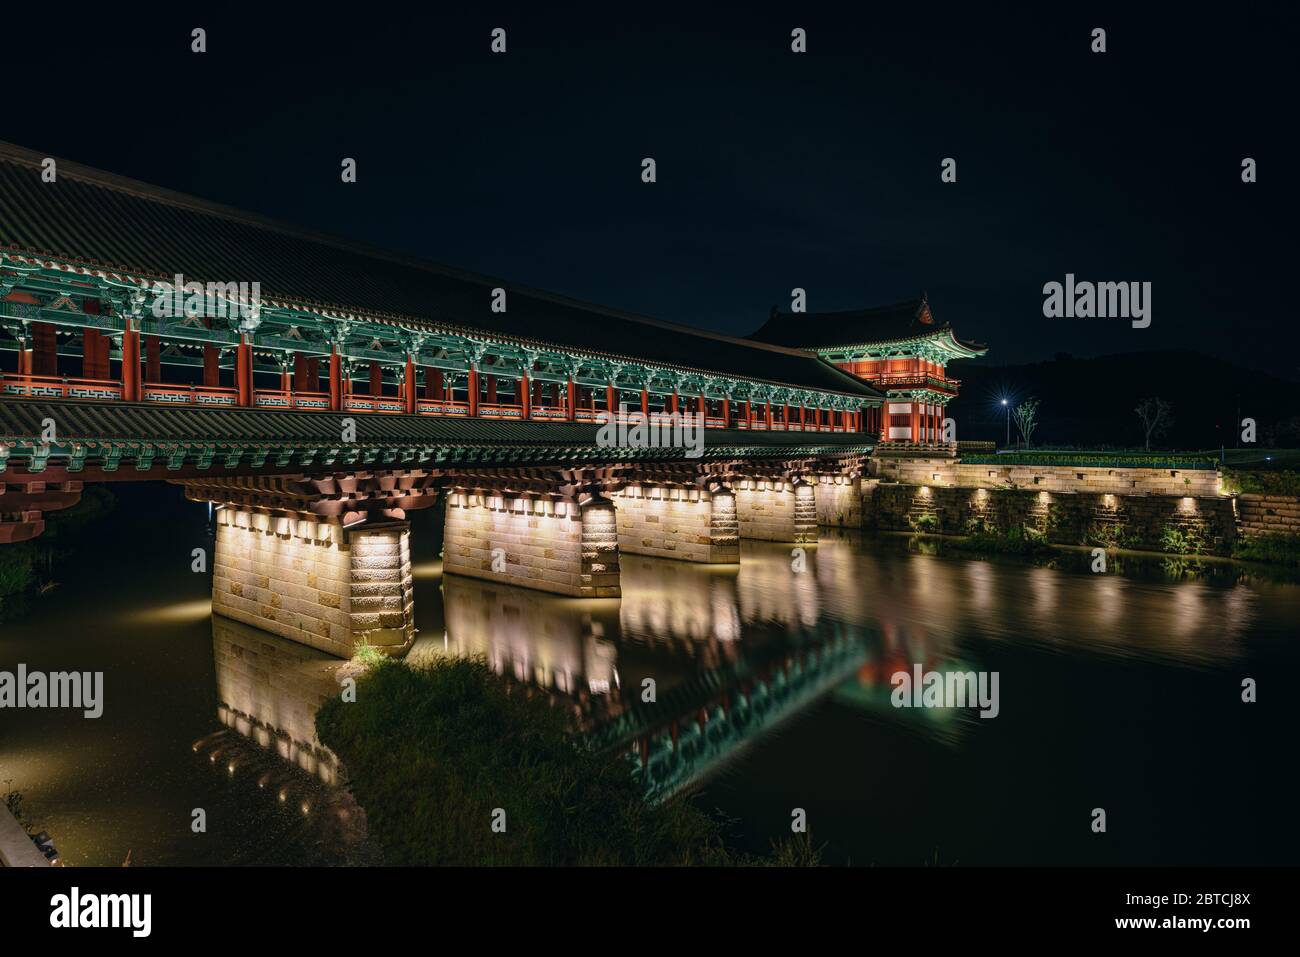 Gyeongju, South Korea - 22 May 2020: The Woljeonggyo Bridge was destroyed at one point, but has been well restored and is a worthwhile sight to add to Stock Photo